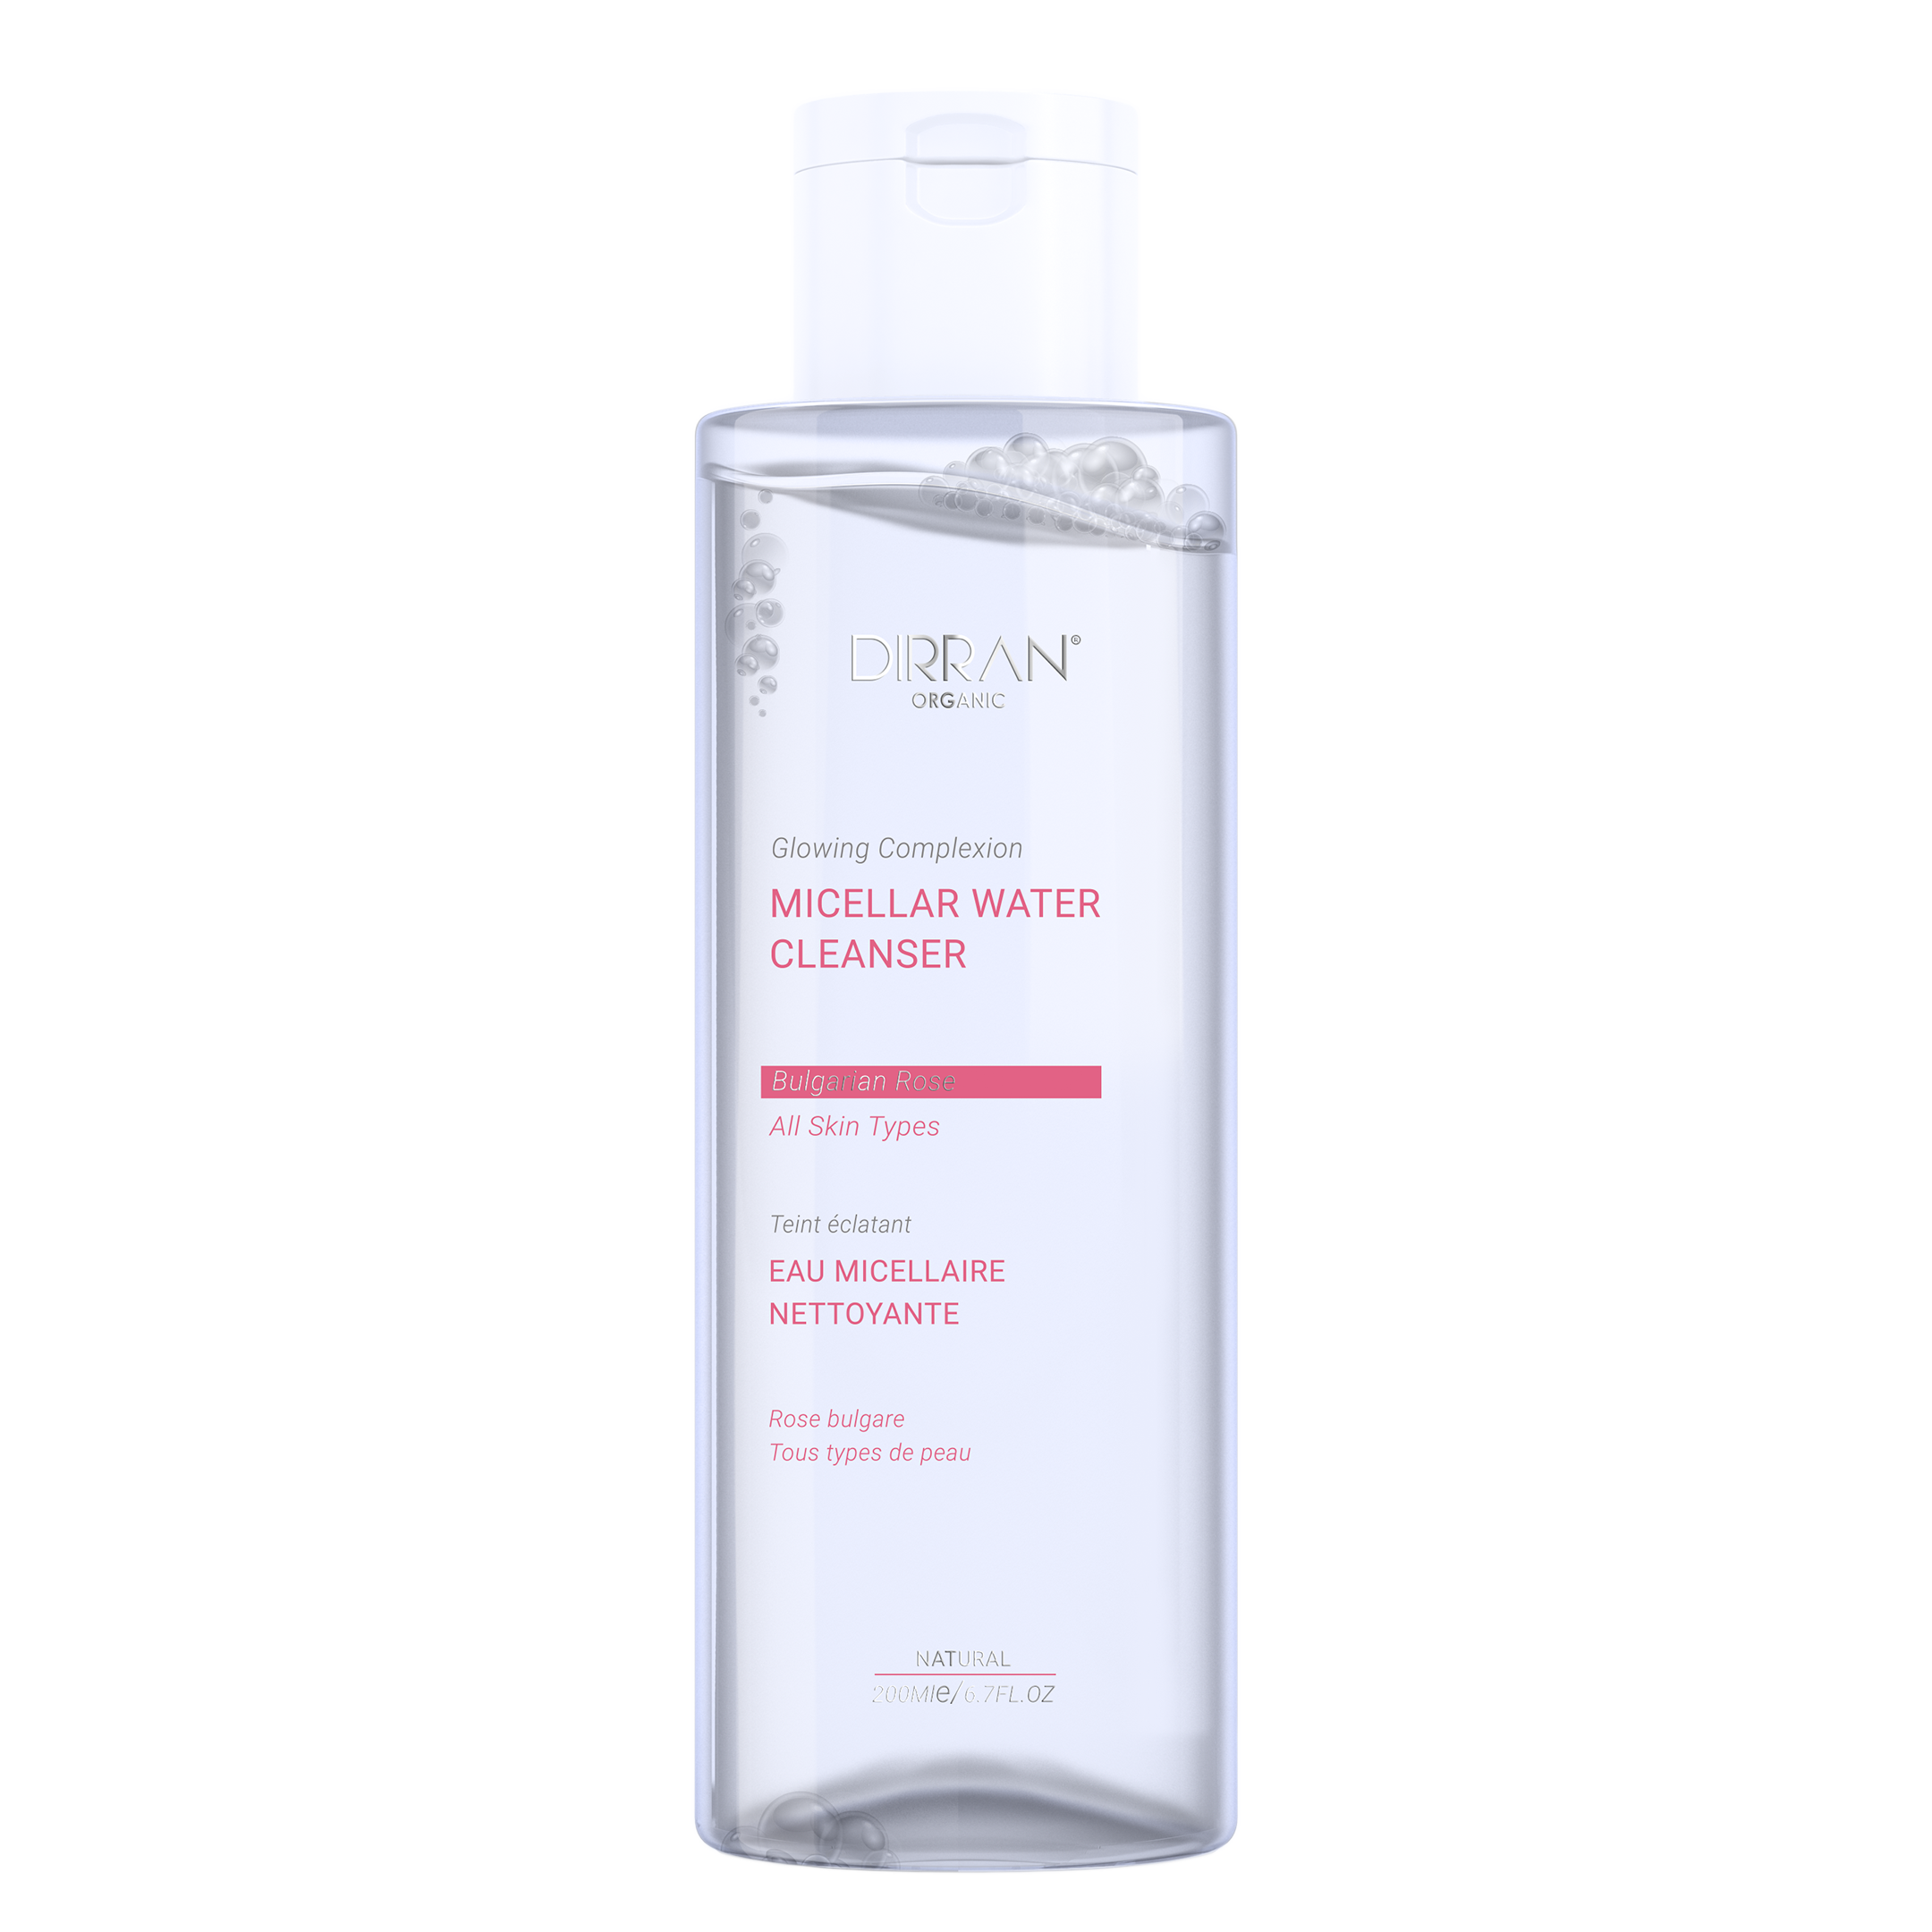 MICELLAR WATER CLEANSER Glowing Complexion